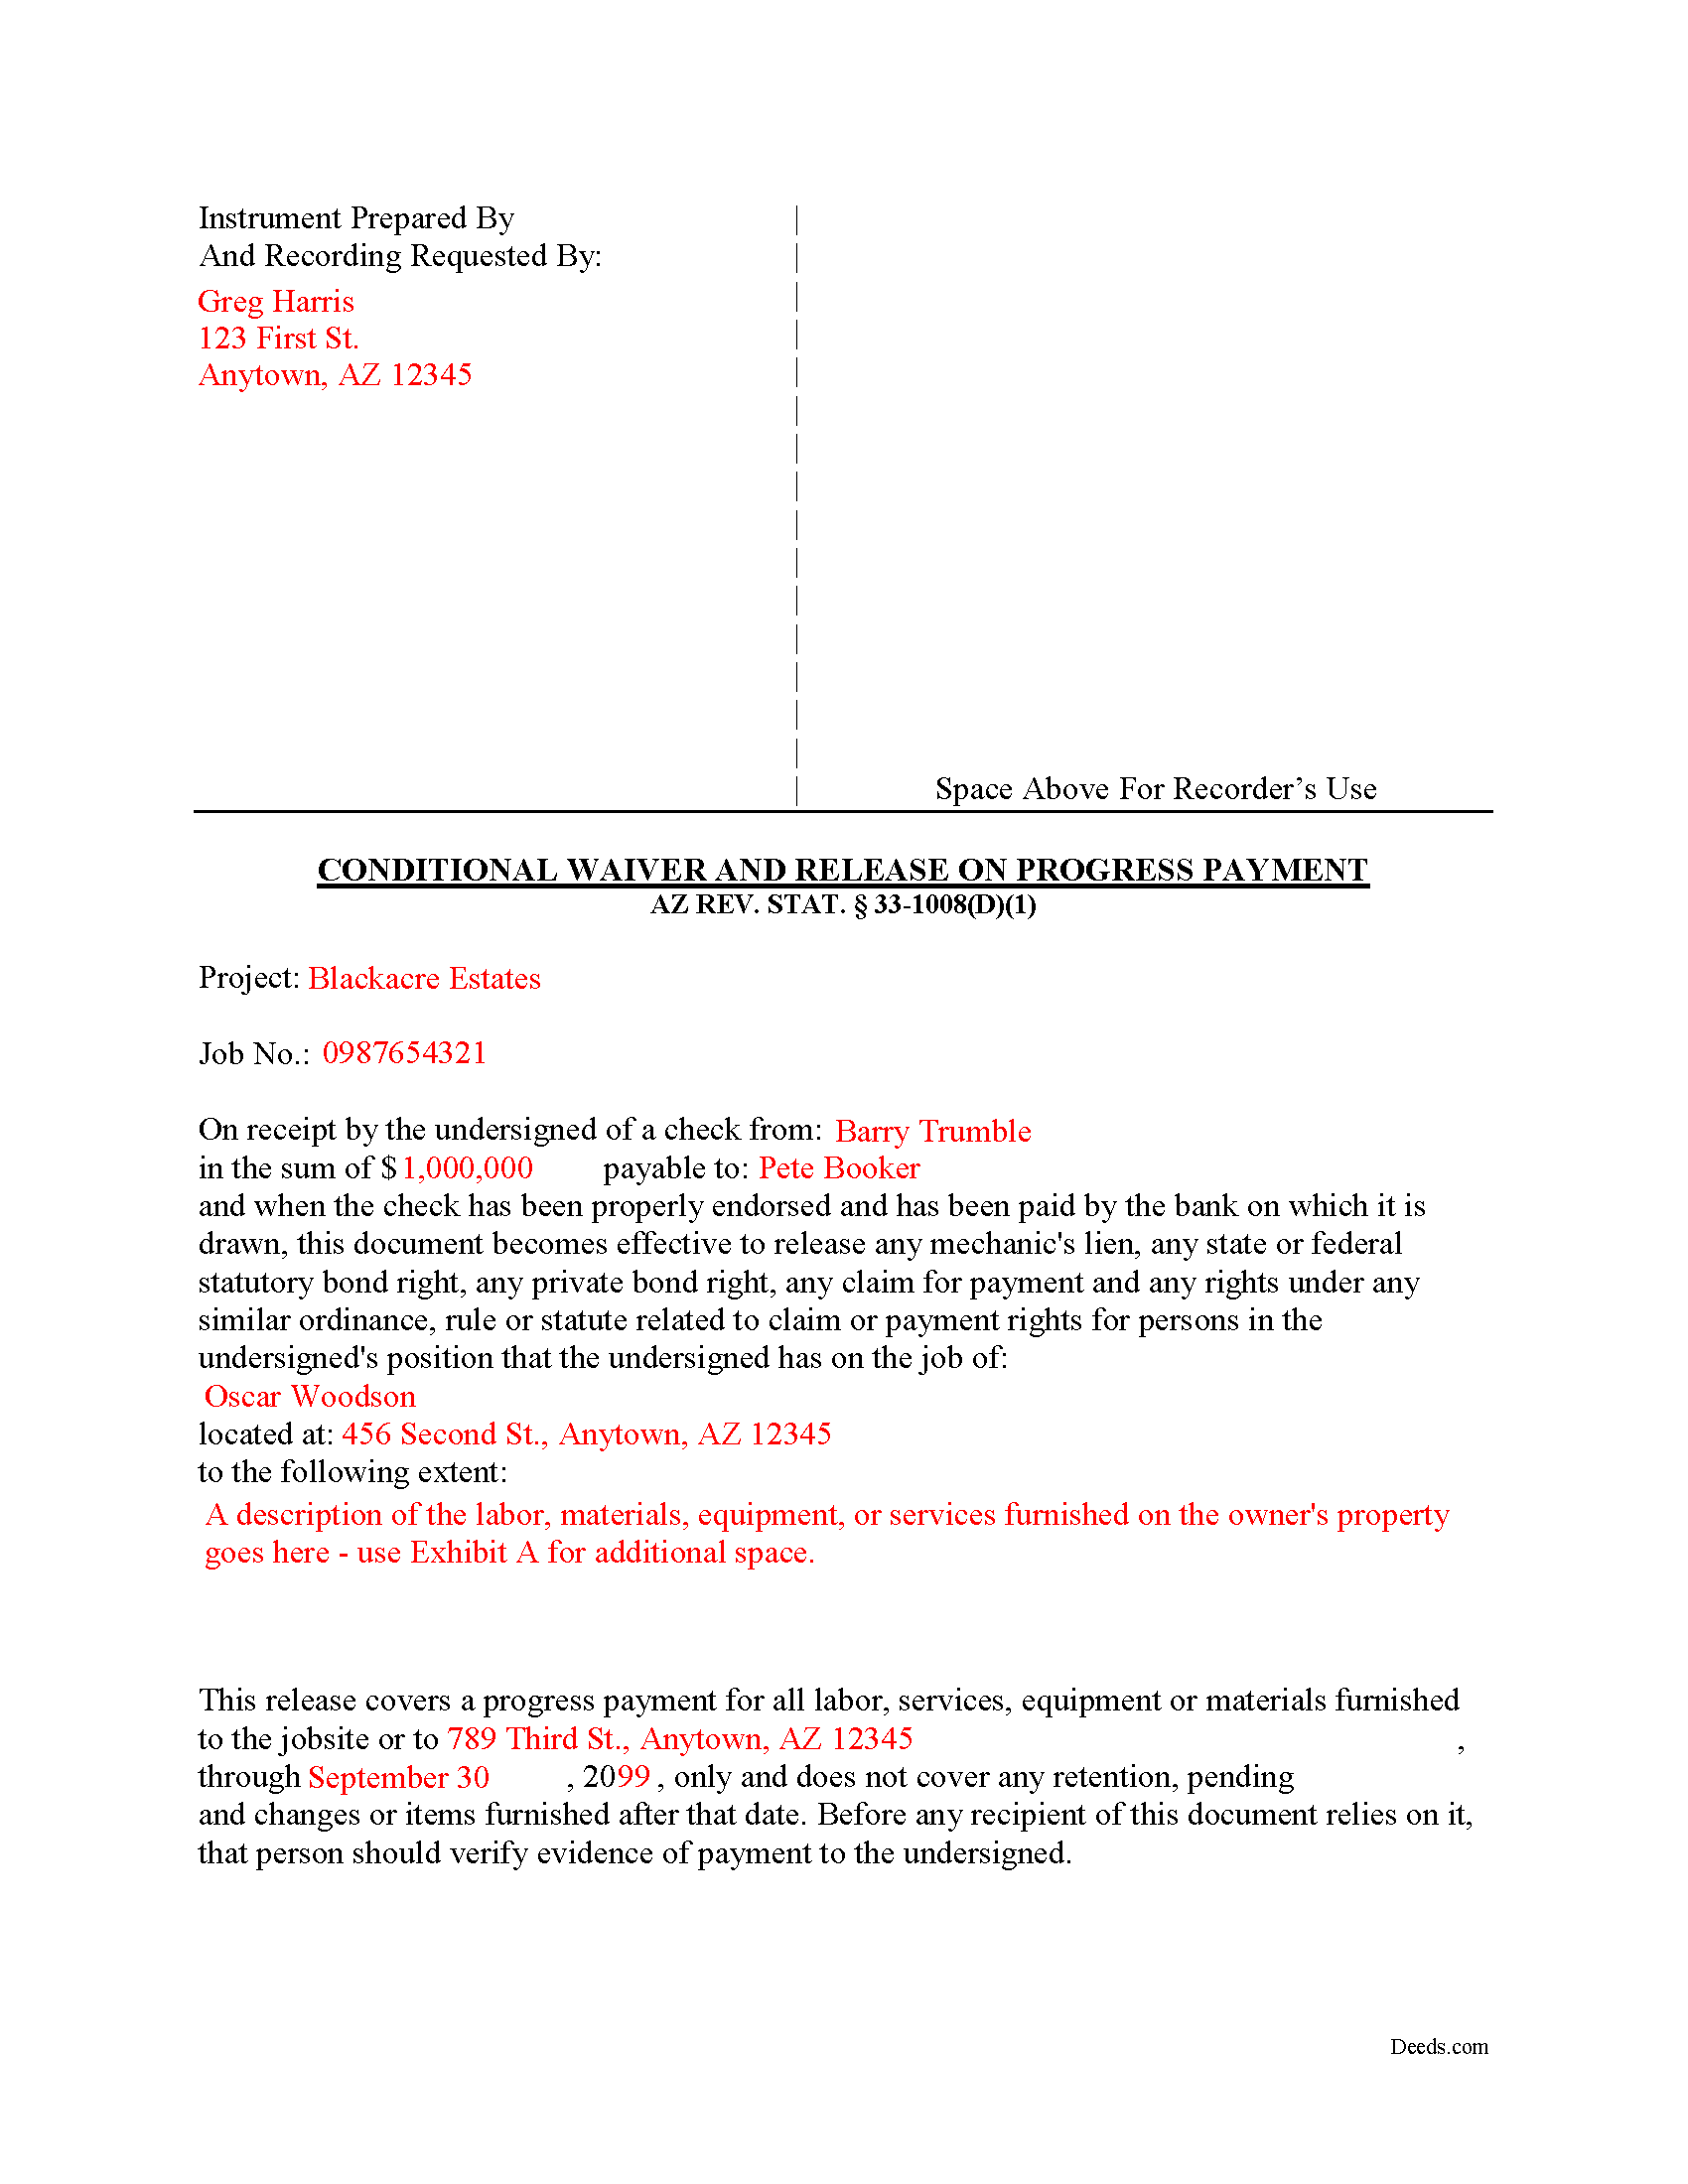 Completed Example of the Unconditional Lien Waiver on Progress Payment Document